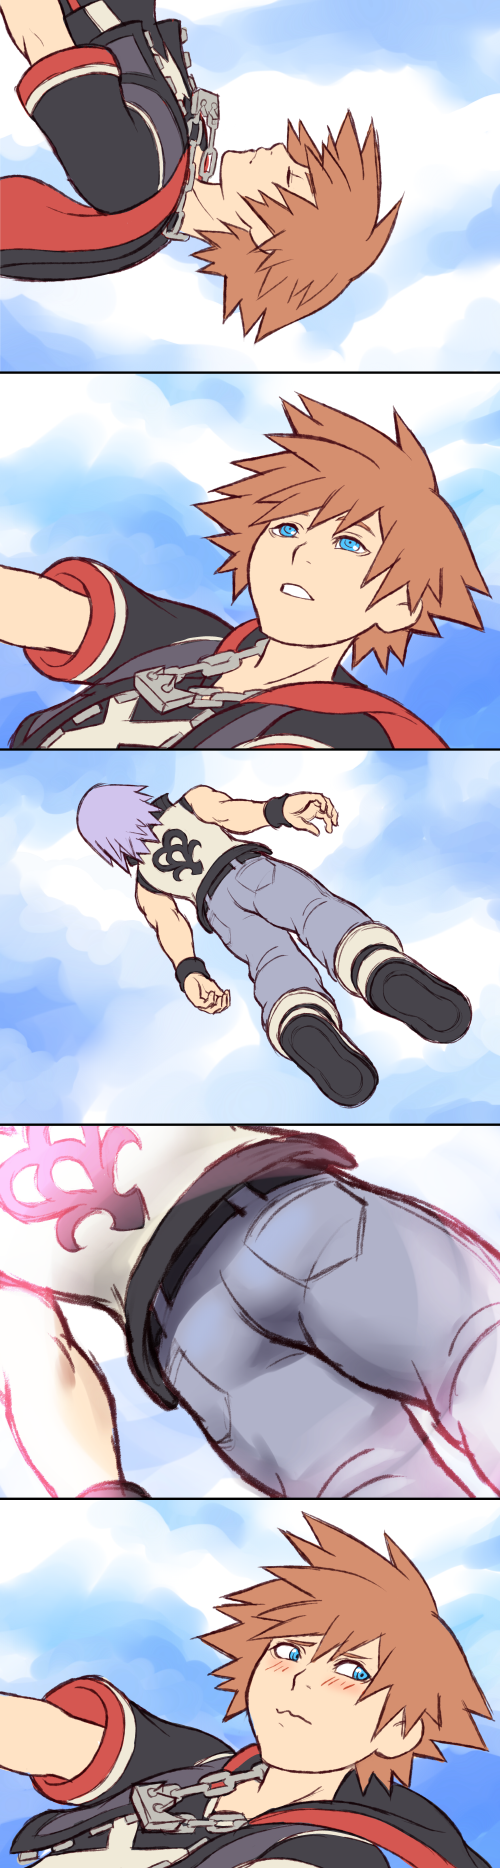 kh3d_comic___view_from_down_here_by_rasenth-d5972sd.png